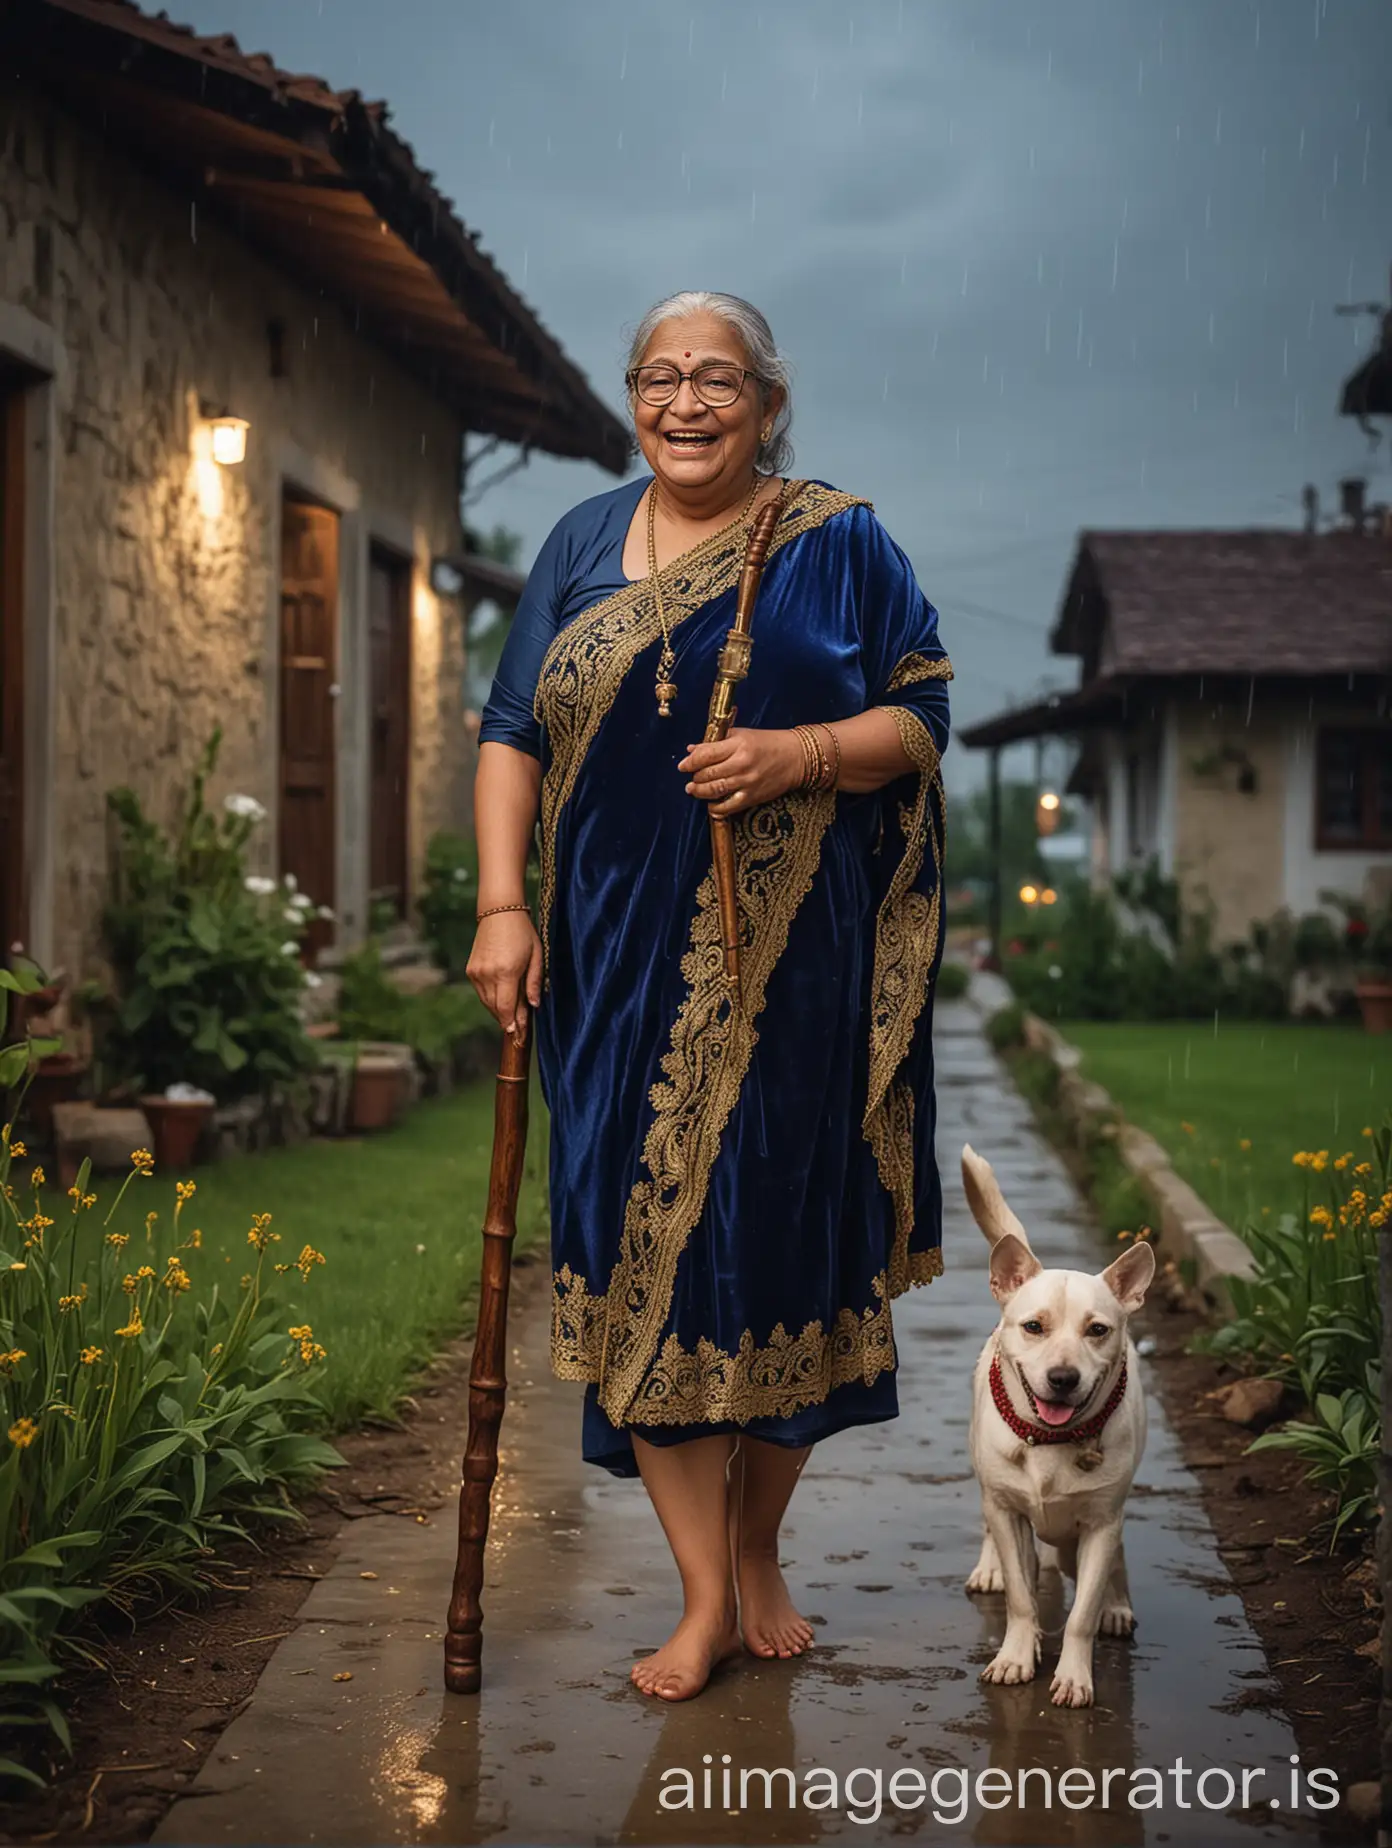 sweet faced old desi very fat woman walking with a wooden walking stick wearing a blue velvet towel on her body and a golden neck lace and a spectacles. she is happy and laughing . she is standing with her dog . its night time and in background there is a luxurious farm house with bulb light and luxurious house with flowers and grass and concrete floor and its raining. she is wearing golden sleepers on feet.